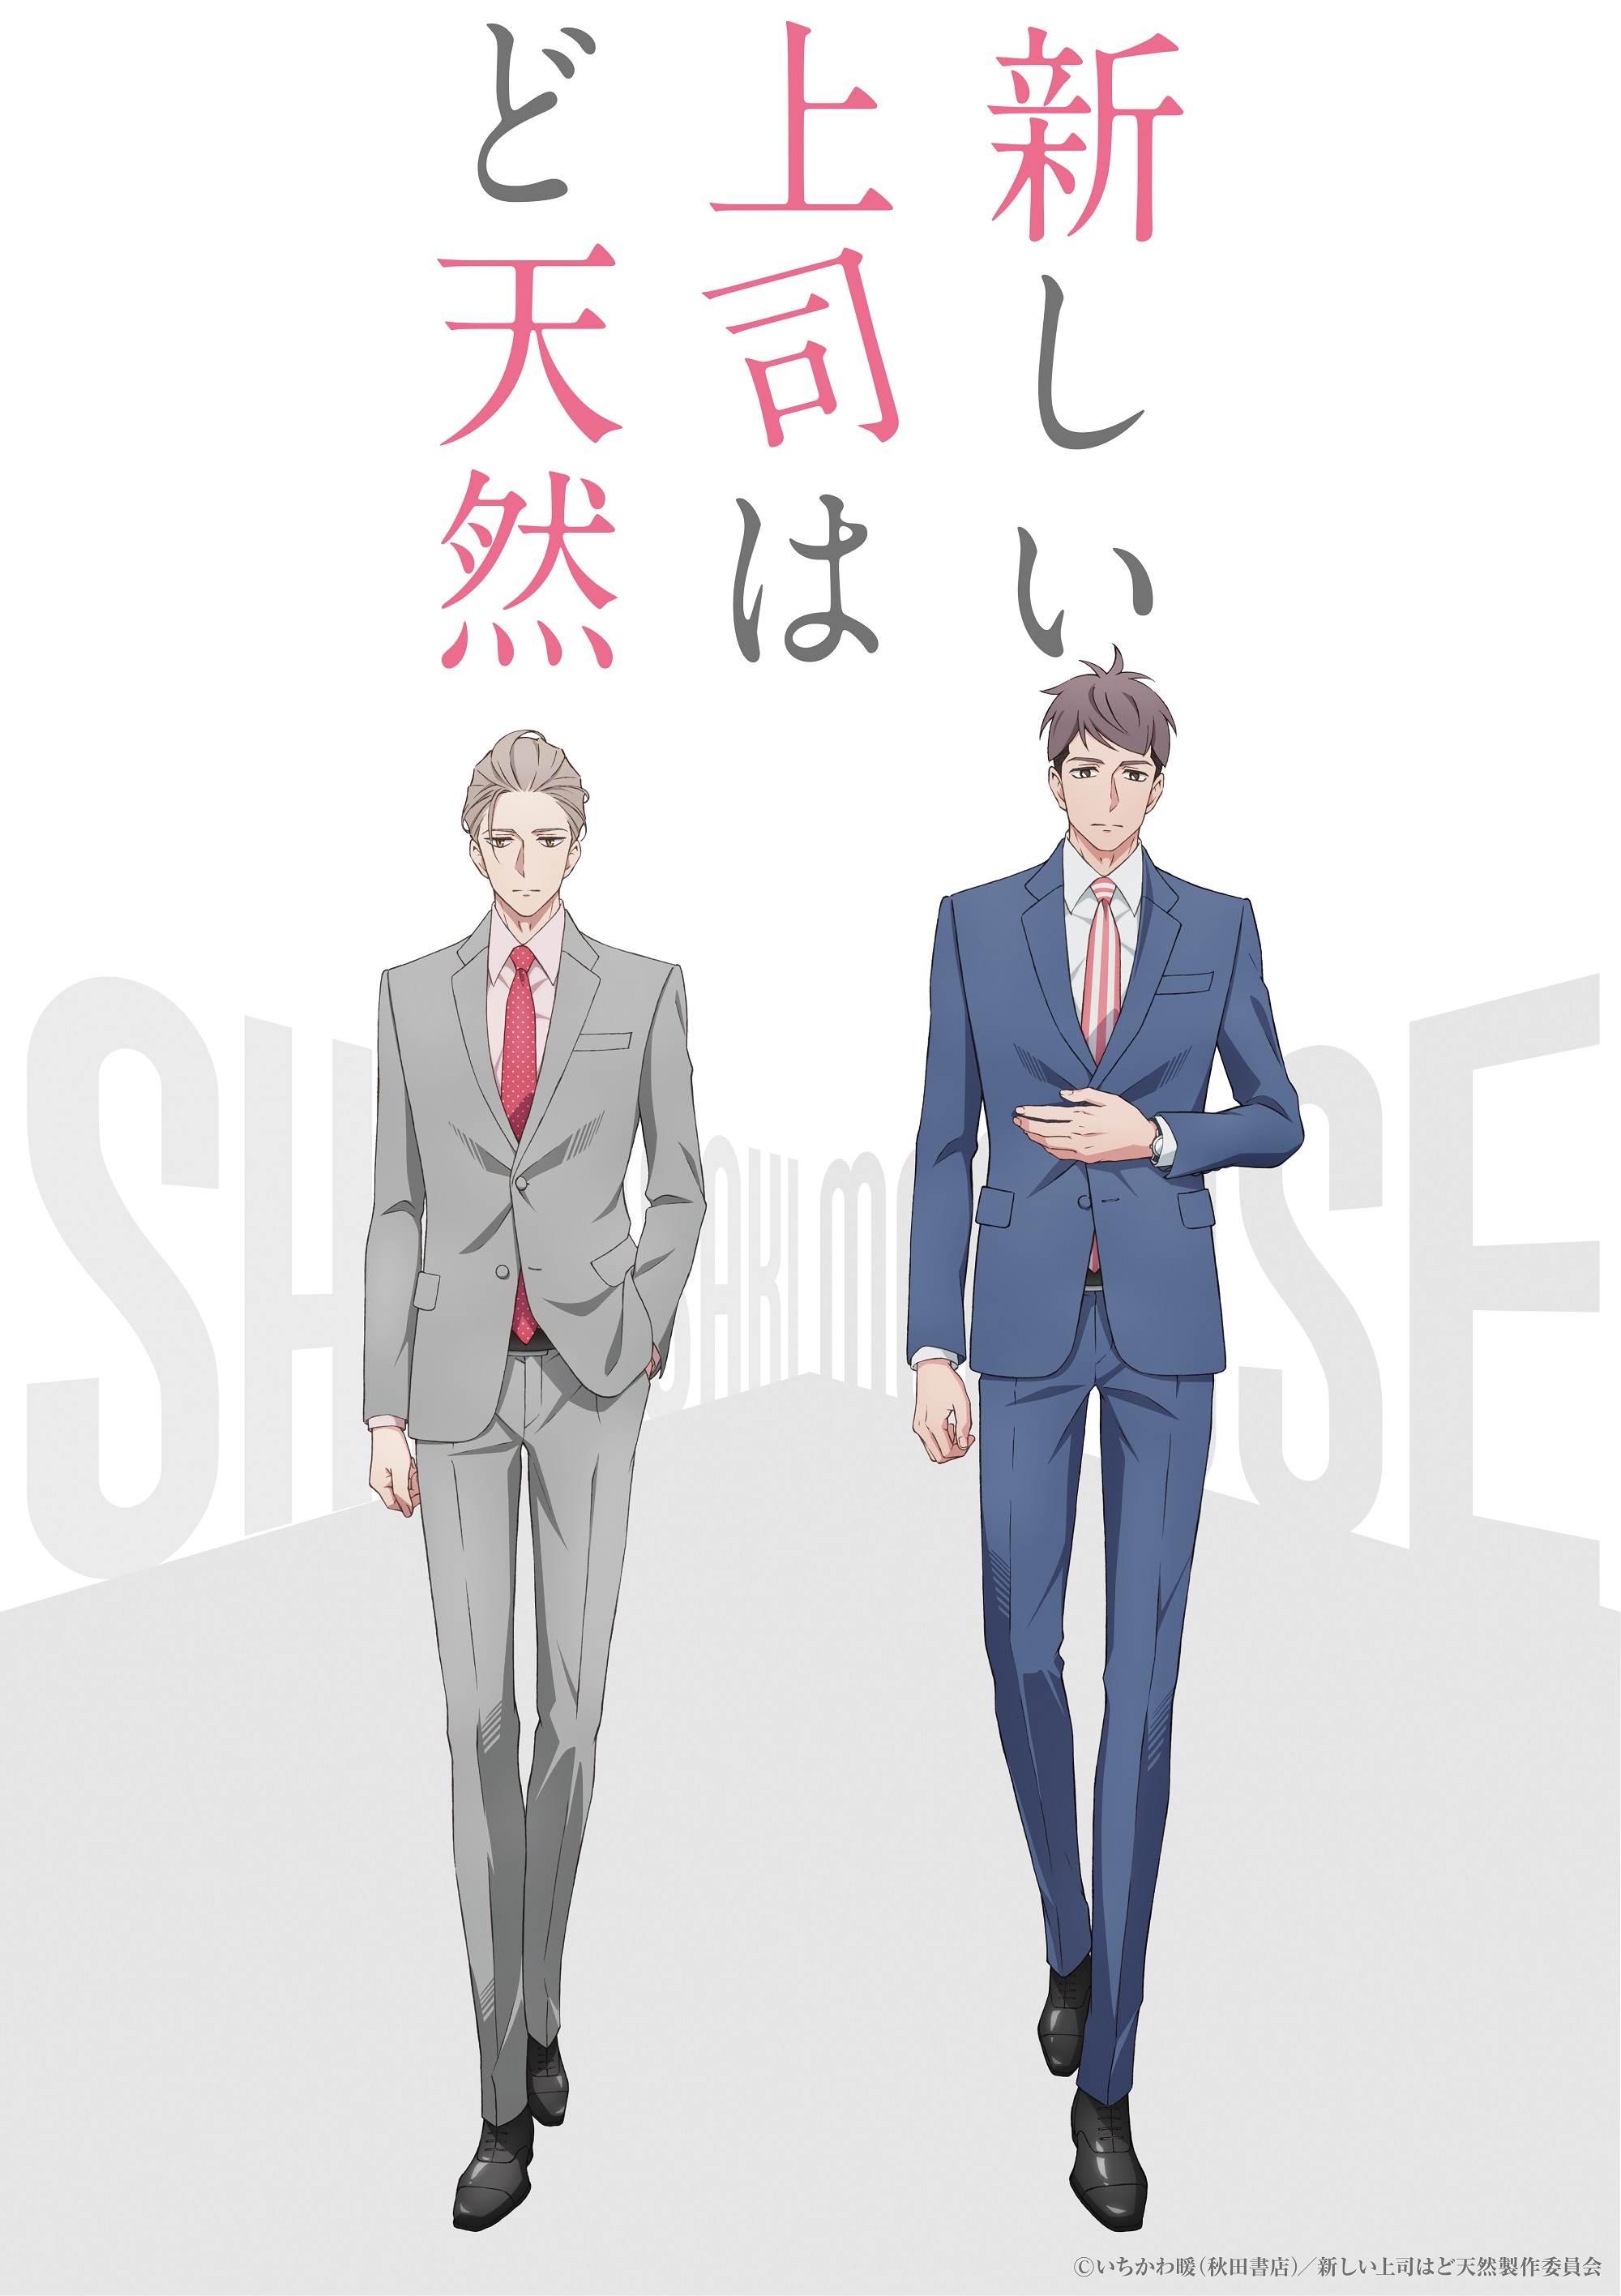 A key visual for the upcoming Atarashii Joushi wa Dotennen TV anime featuring the main characters - office worker Kentarou Momose and his boss, Yuusei Shirsaki - dressed in three piece suits and posed walking together against a blank white background.